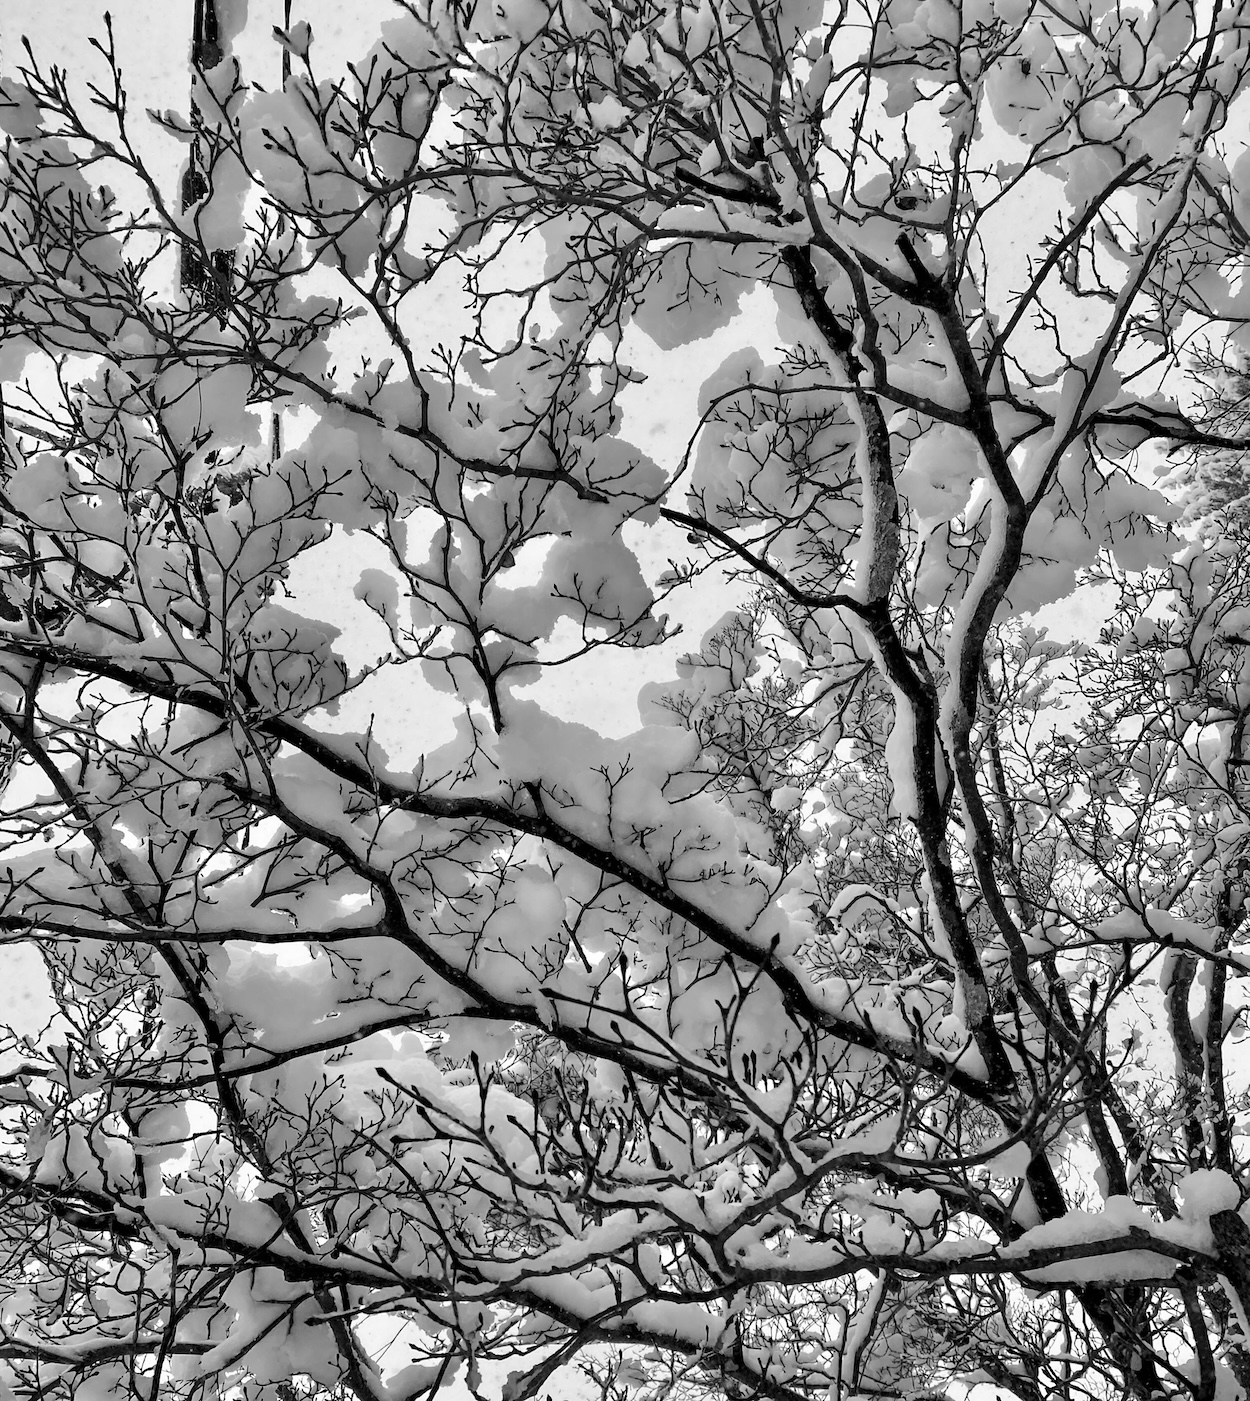 Looking Up into Dogwood Branches Covered in Snow